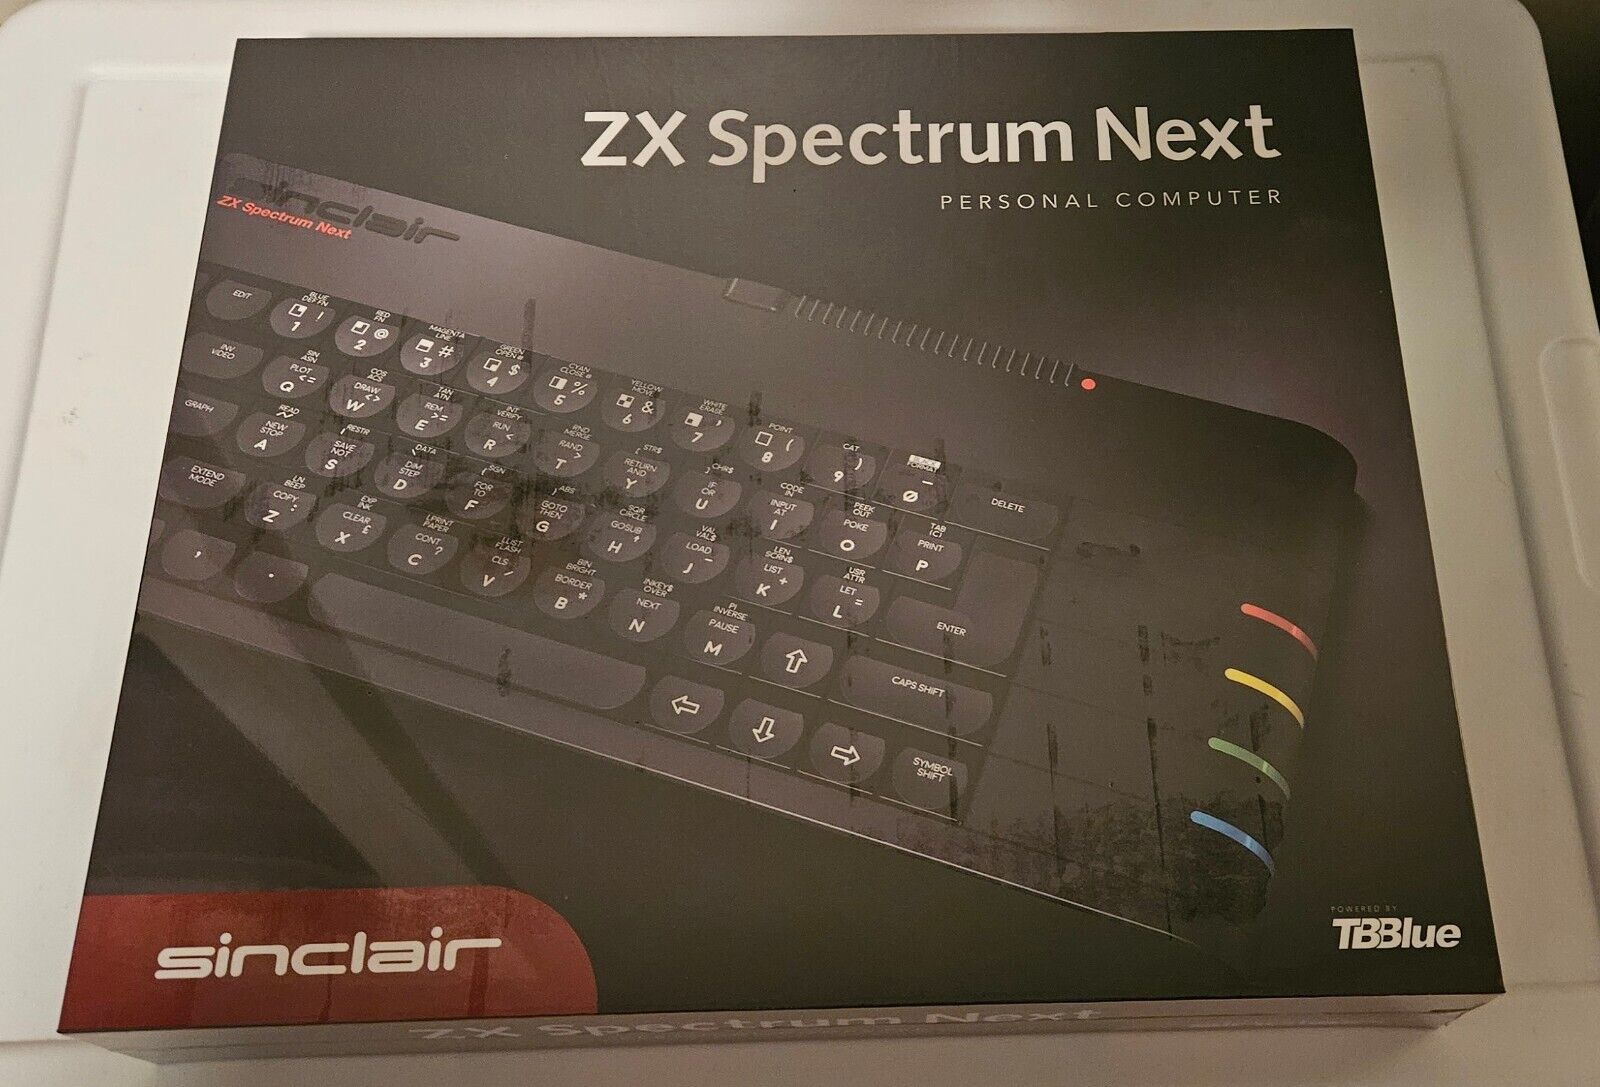 NEW, Sealed - Sinclair ZX Spectrum Next Kickstarter Issue 2 Accelerated, 2MB